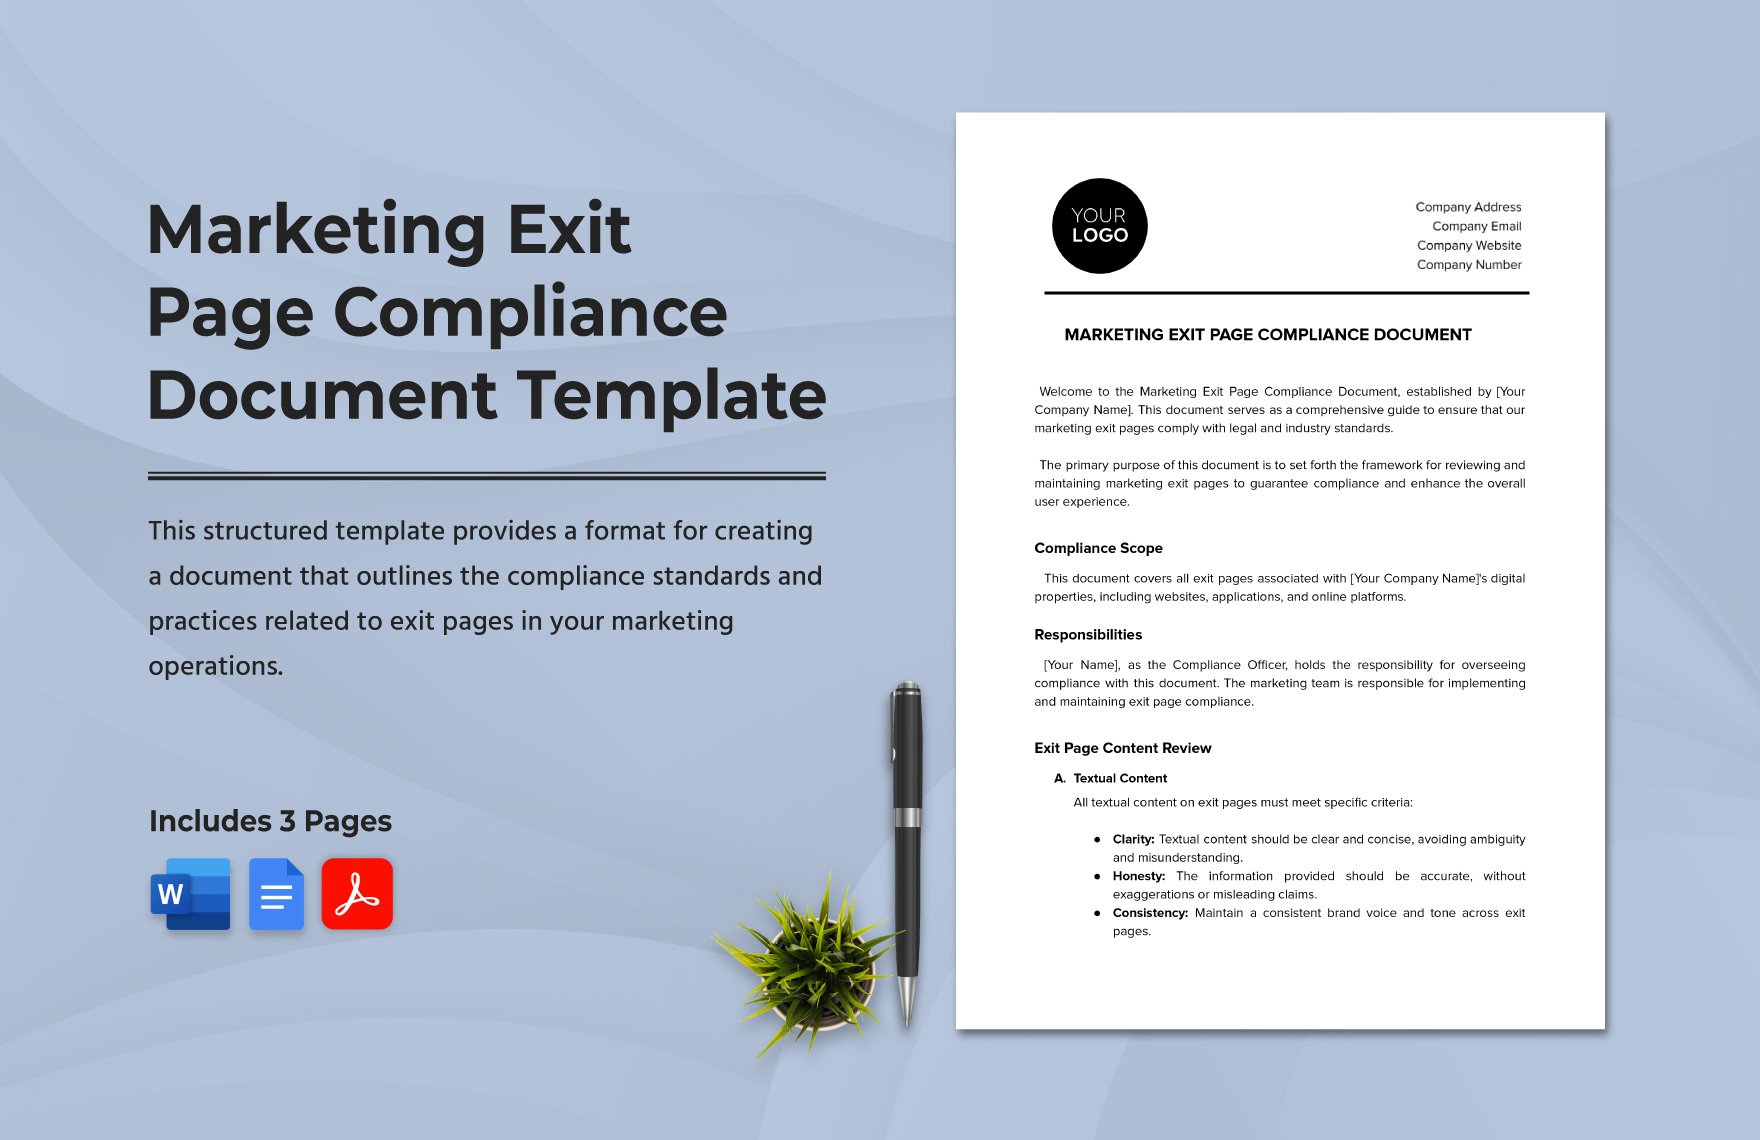 Marketing Exit Page Compliance Document Template in Word, Google Docs, PDF